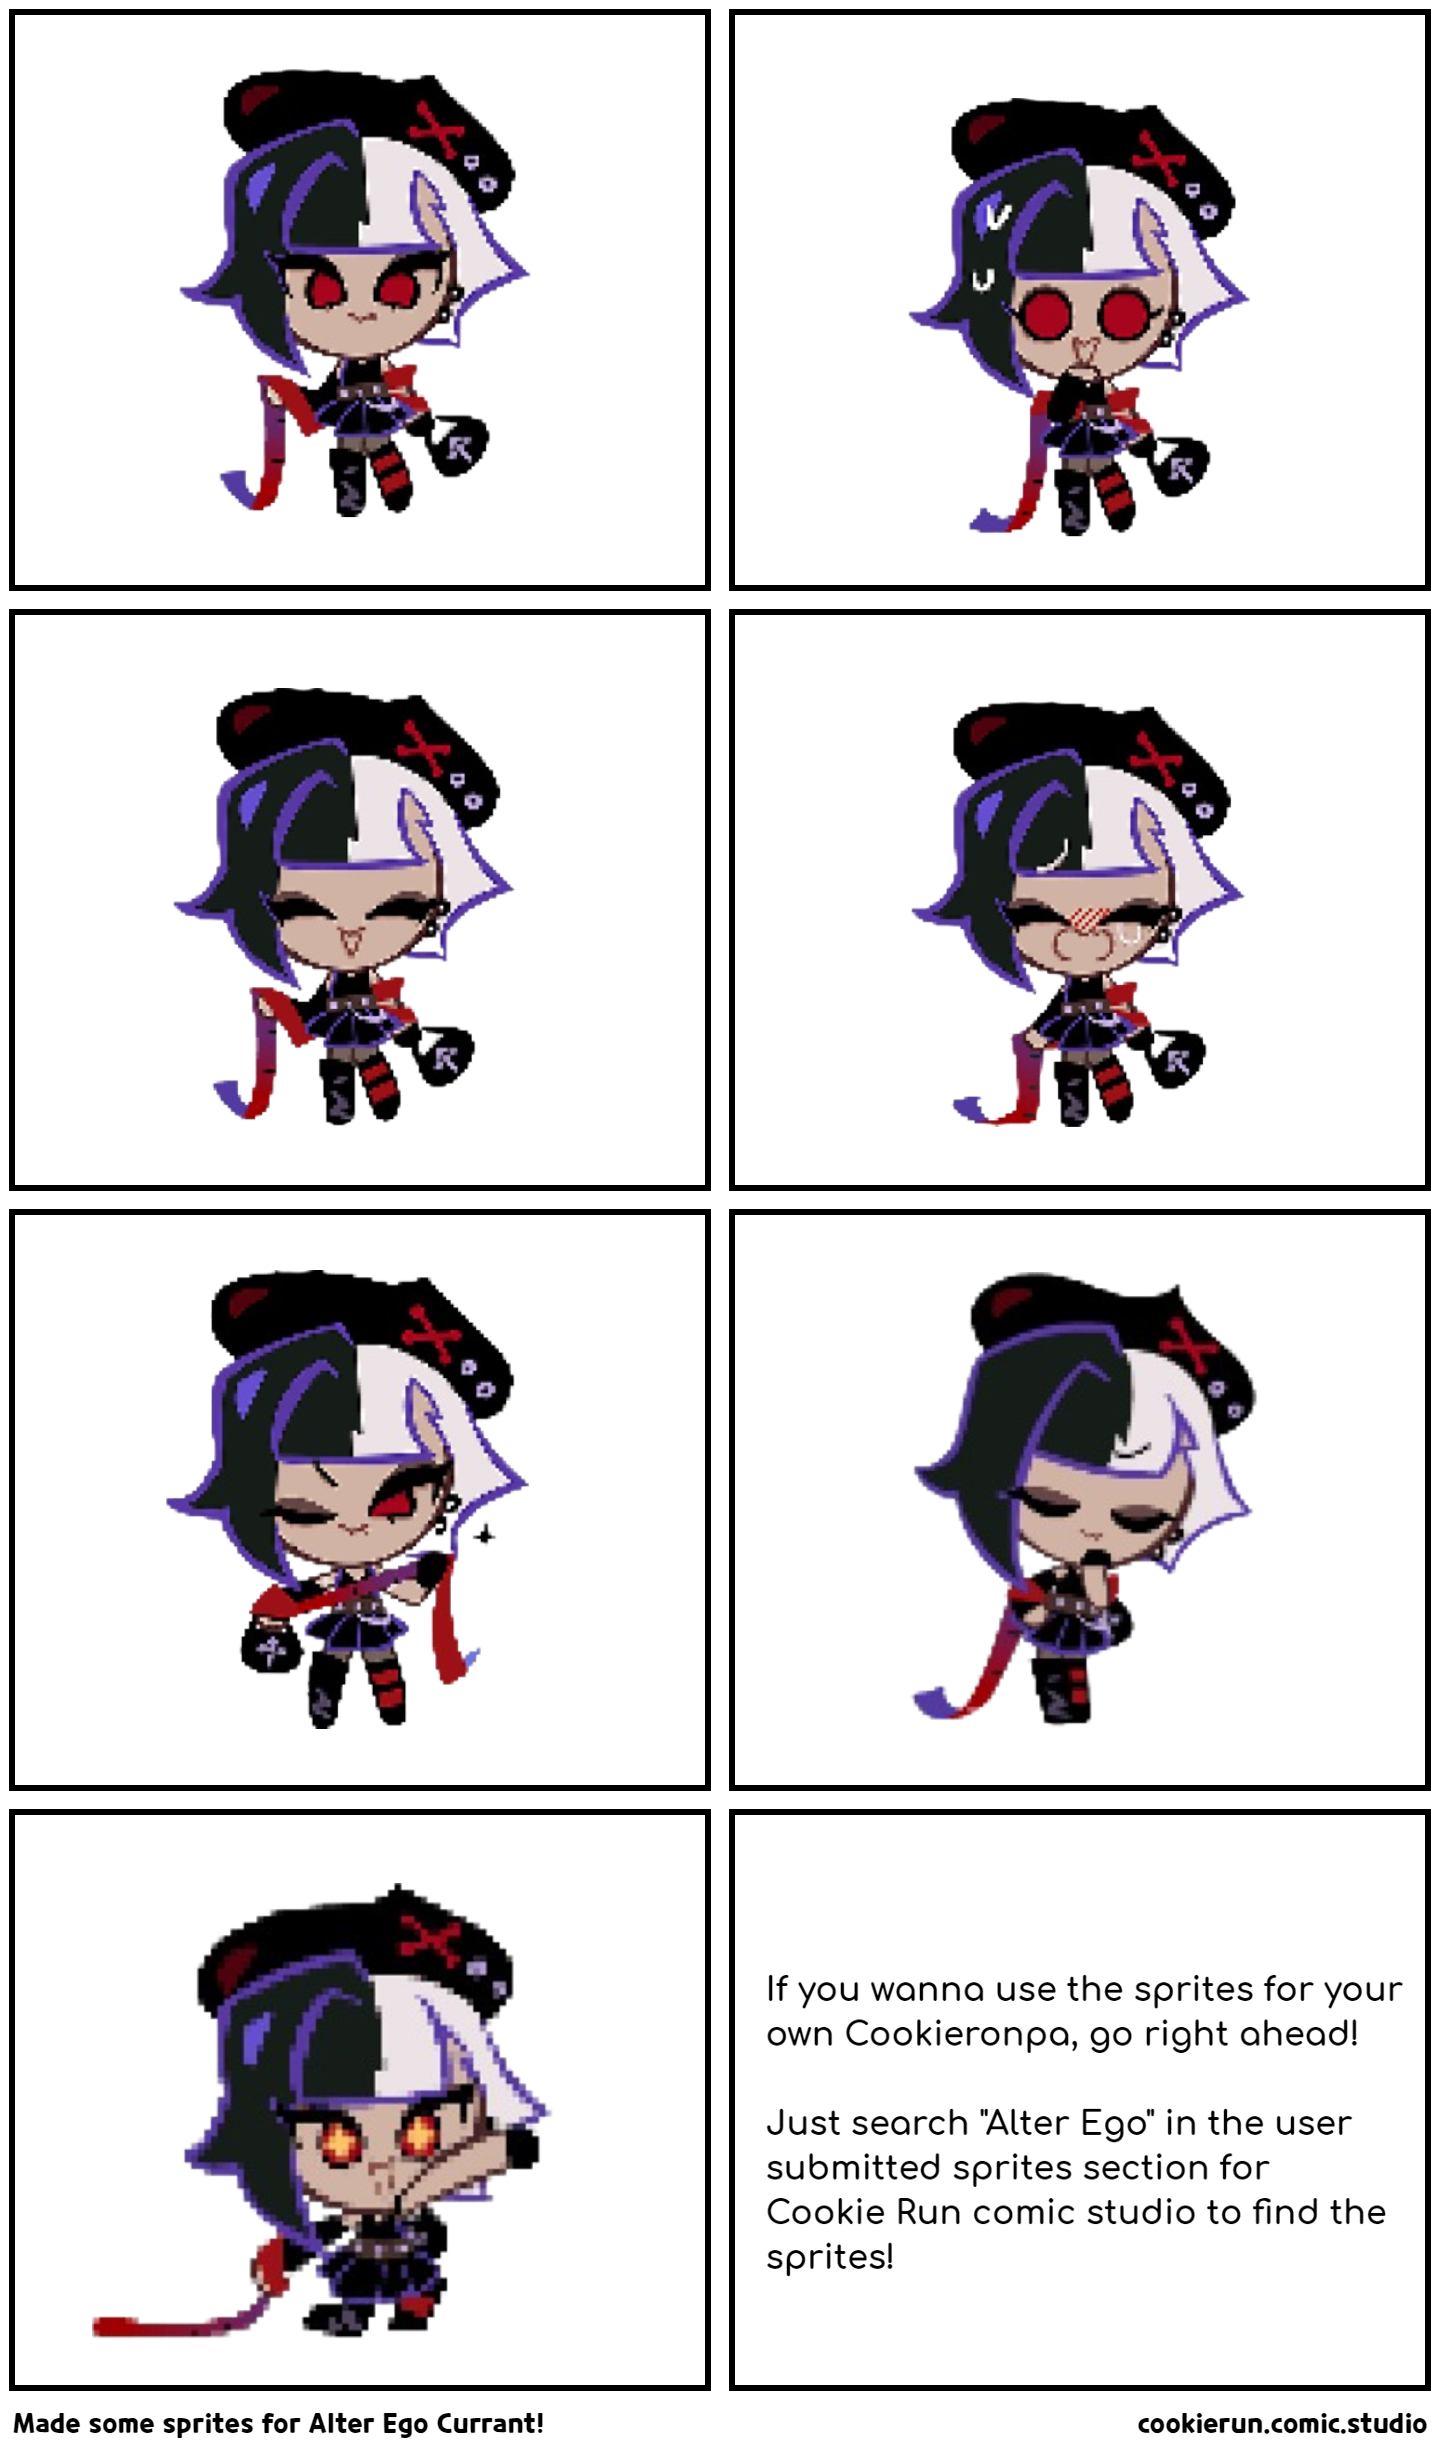 Made some sprites for Alter Ego Currant!